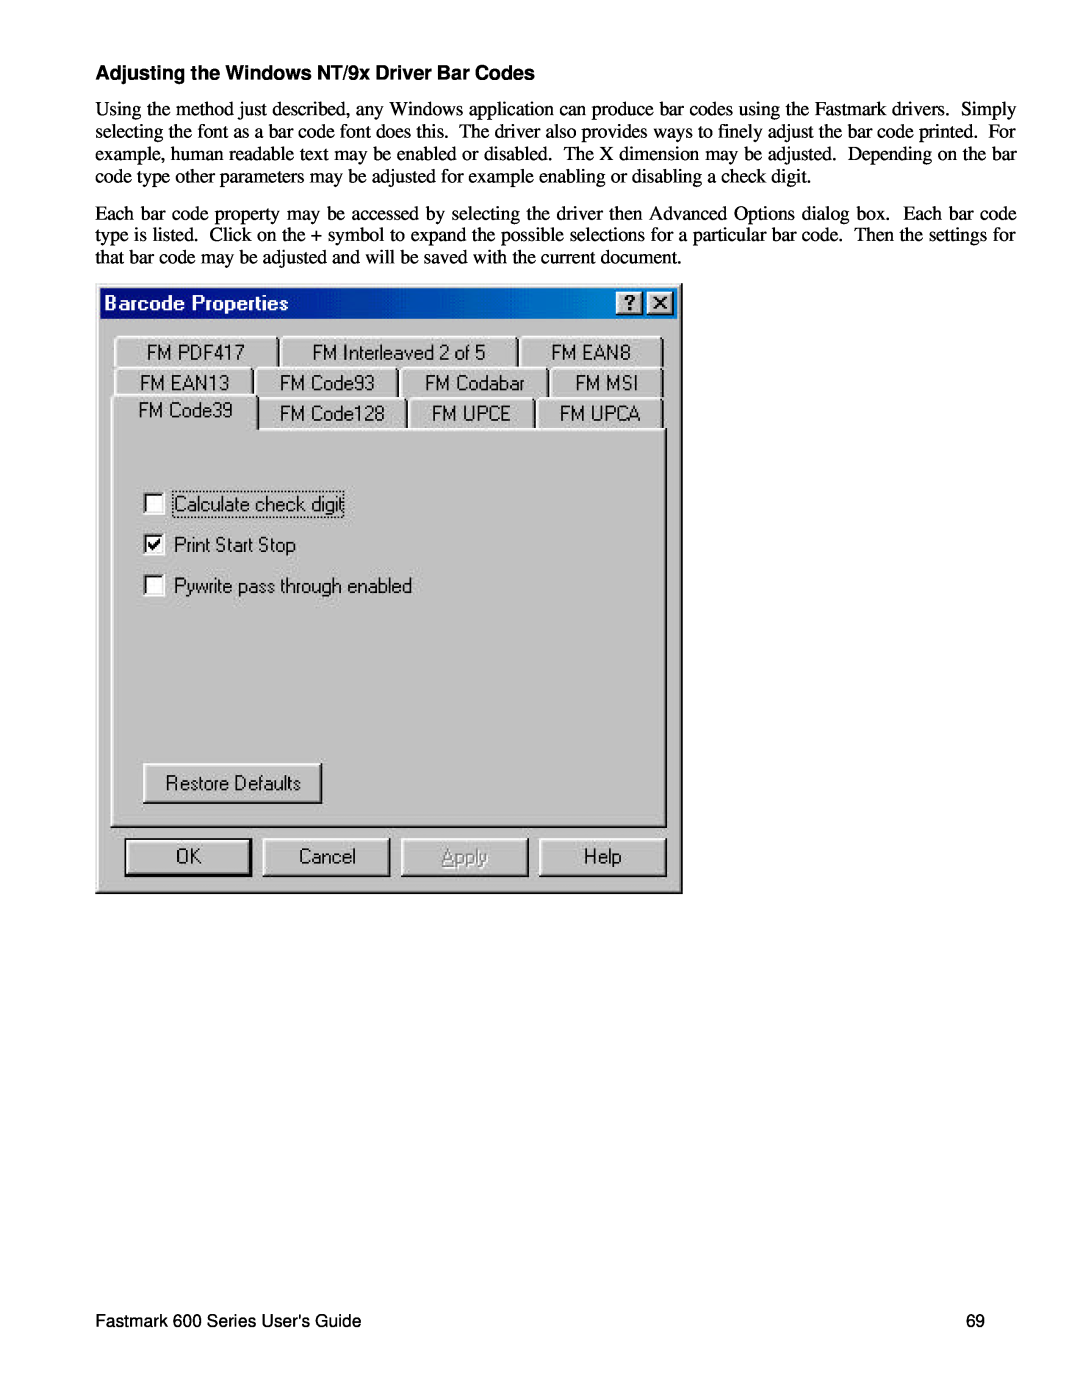 AMT Datasouth manual Adjusting the Windows NT/9x Driver Bar Codes, Fastmark 600 Series Users Guide 